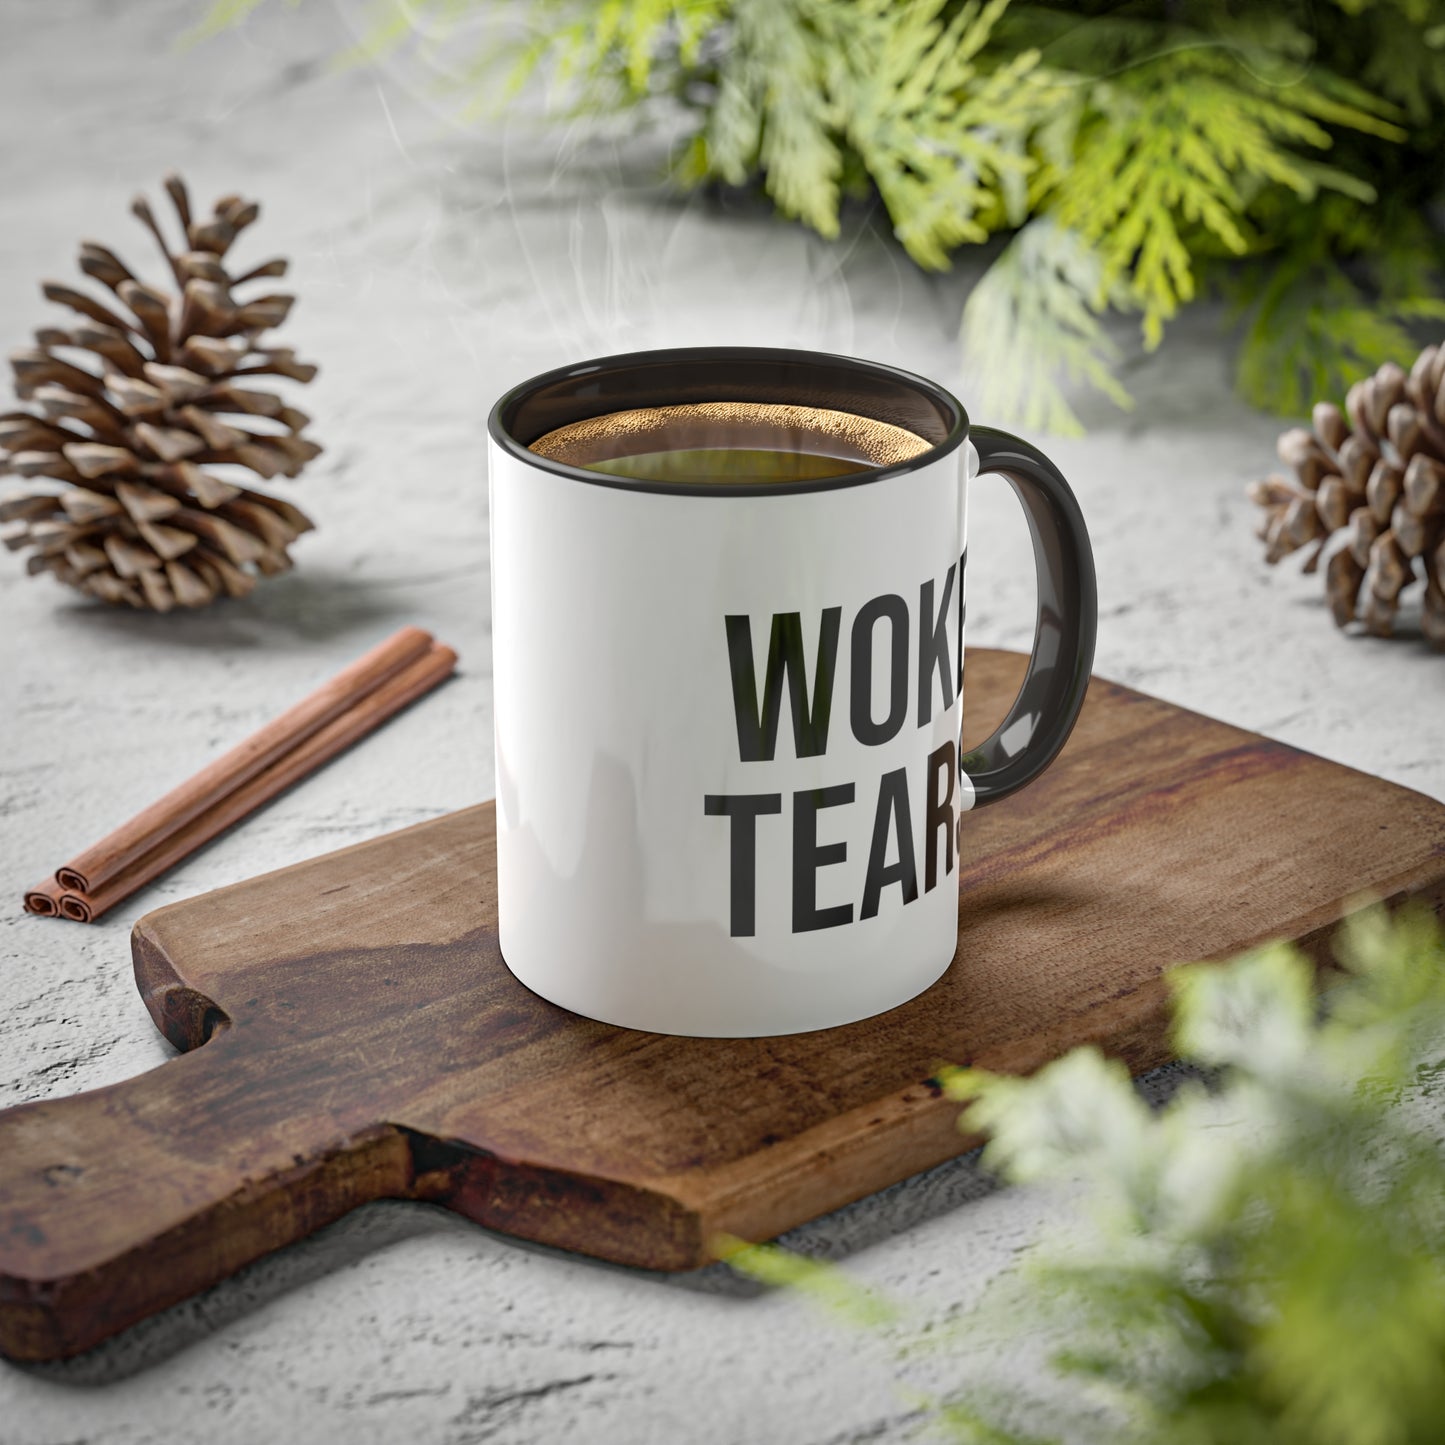 Woke Tears Coffee Mug, Funny Political Commentary Cup, Sarcastic Humor, Gift for Friend, Unique Office Mug, Conversation Starter - News For Reasonable People